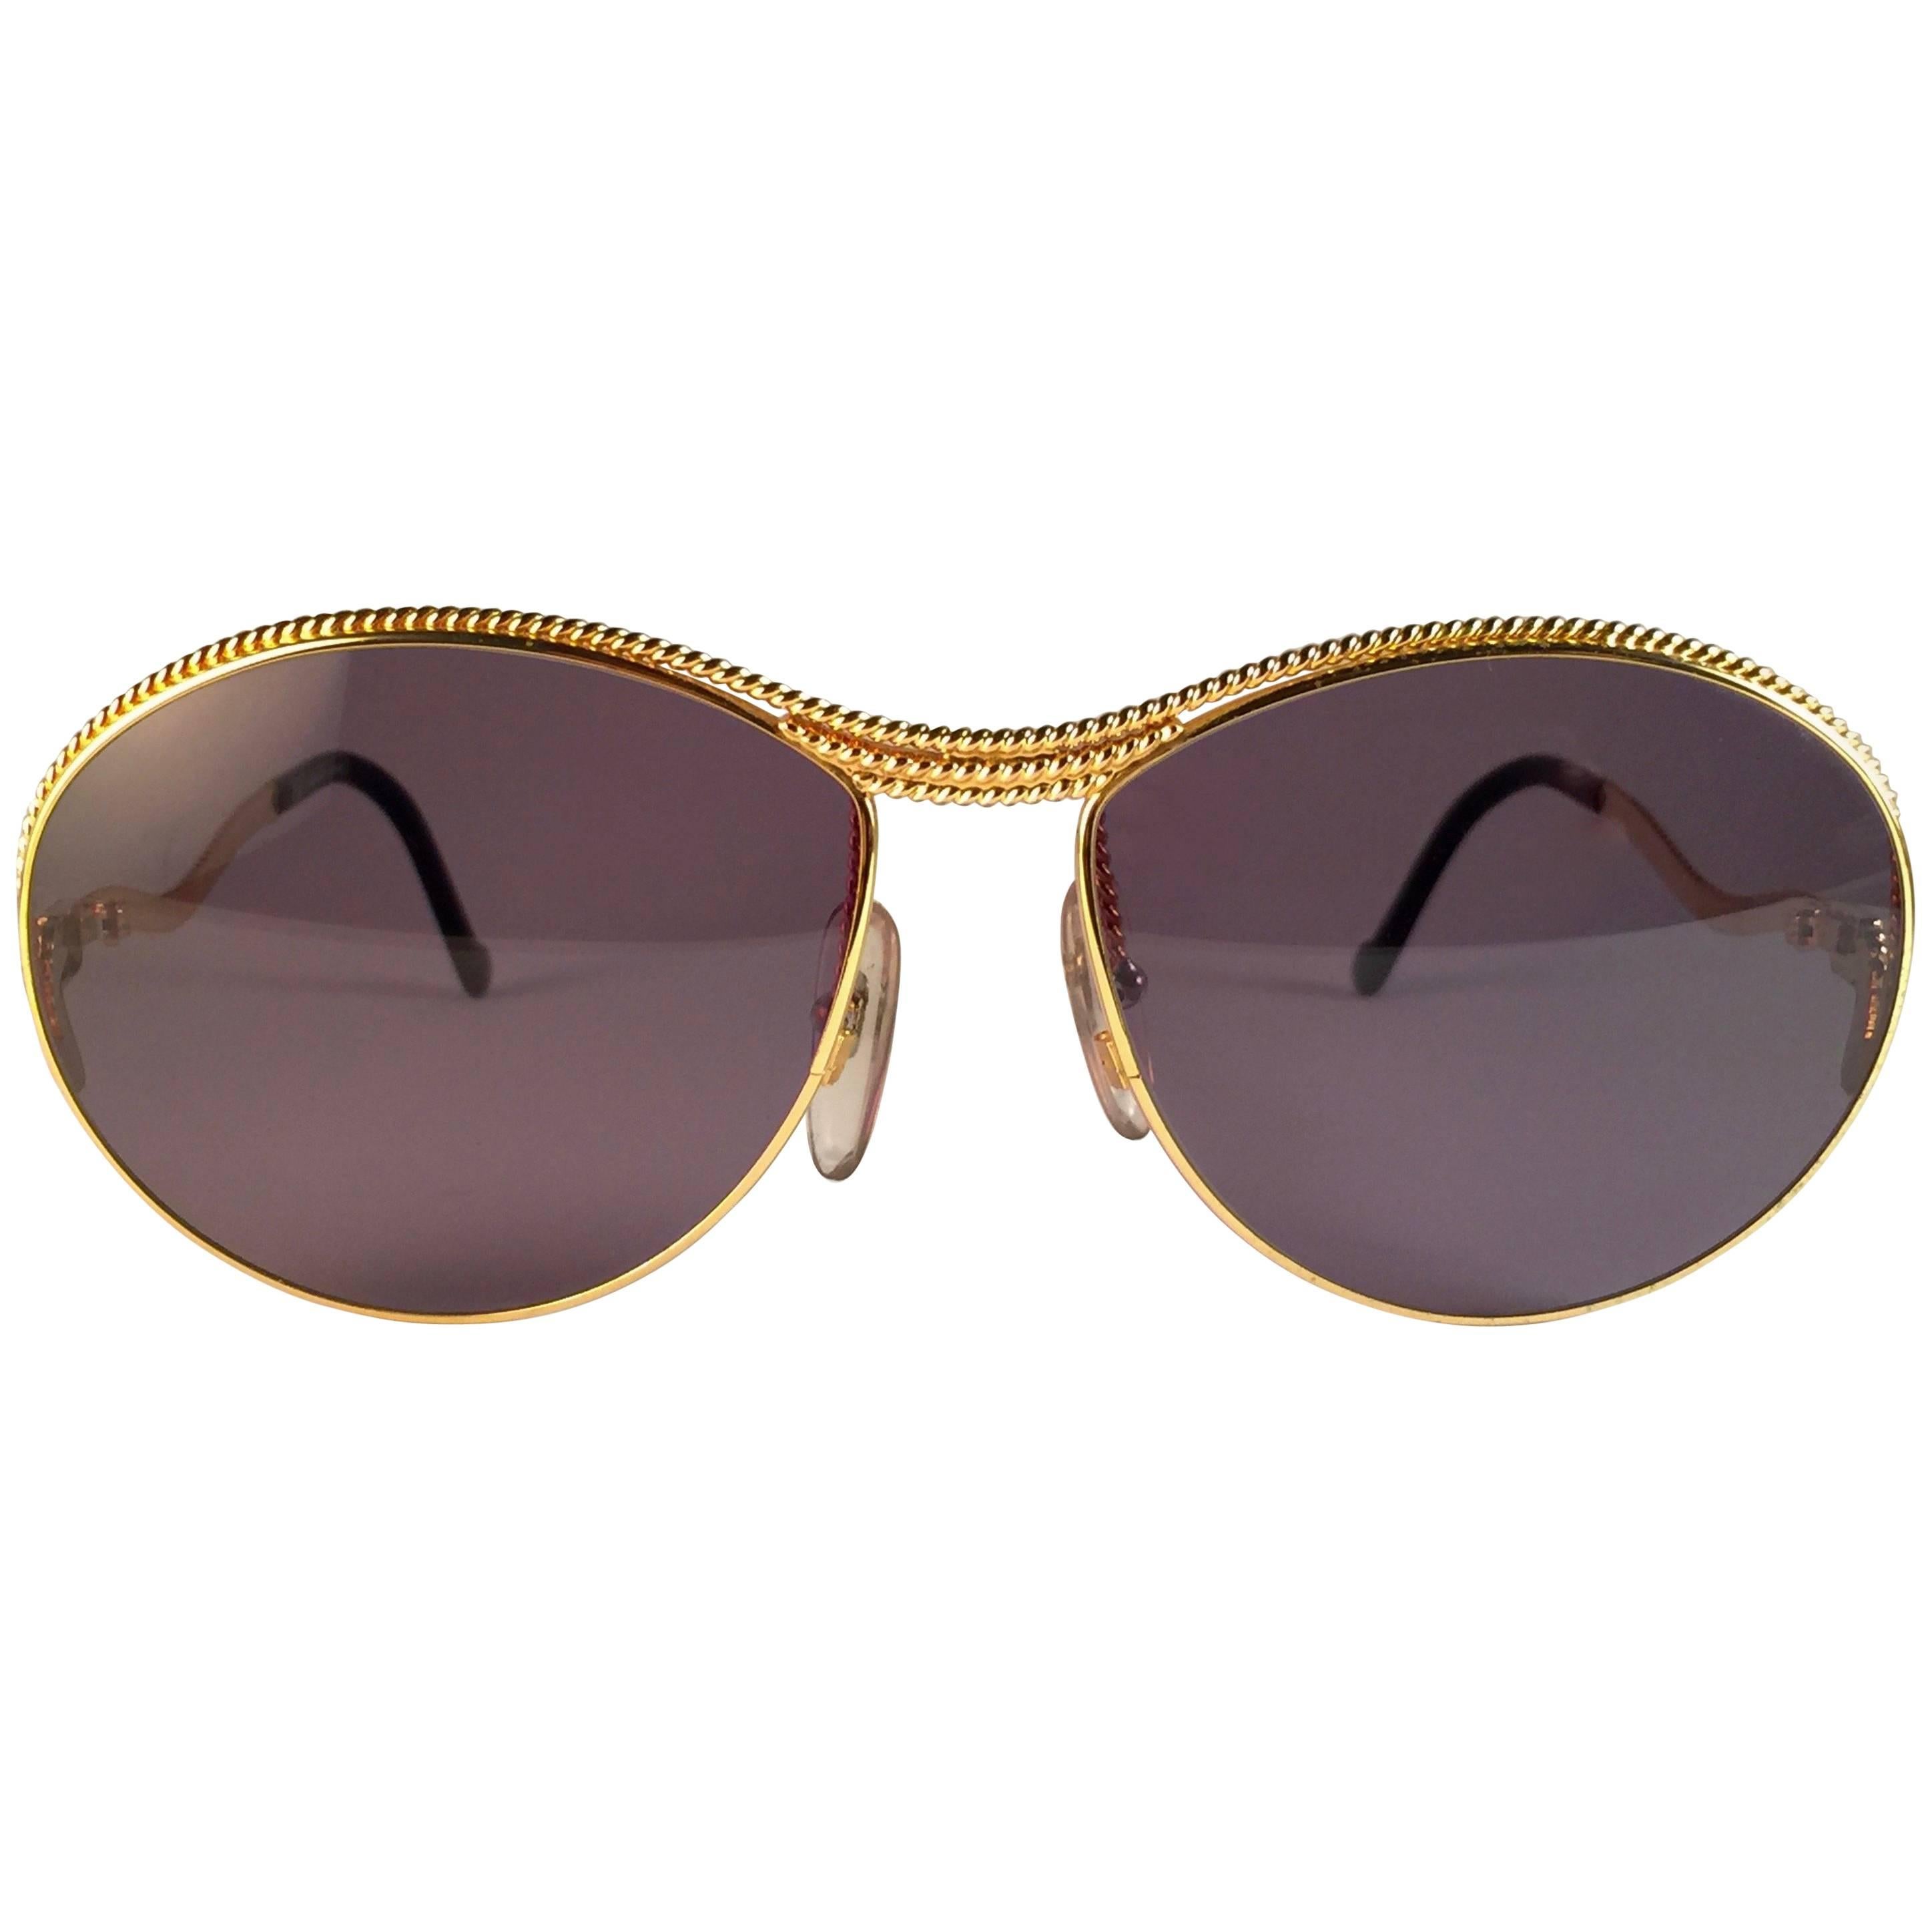 New Vintage Christian Lacroix Oval Gold Accents 1980 France Sunglasses For Sale